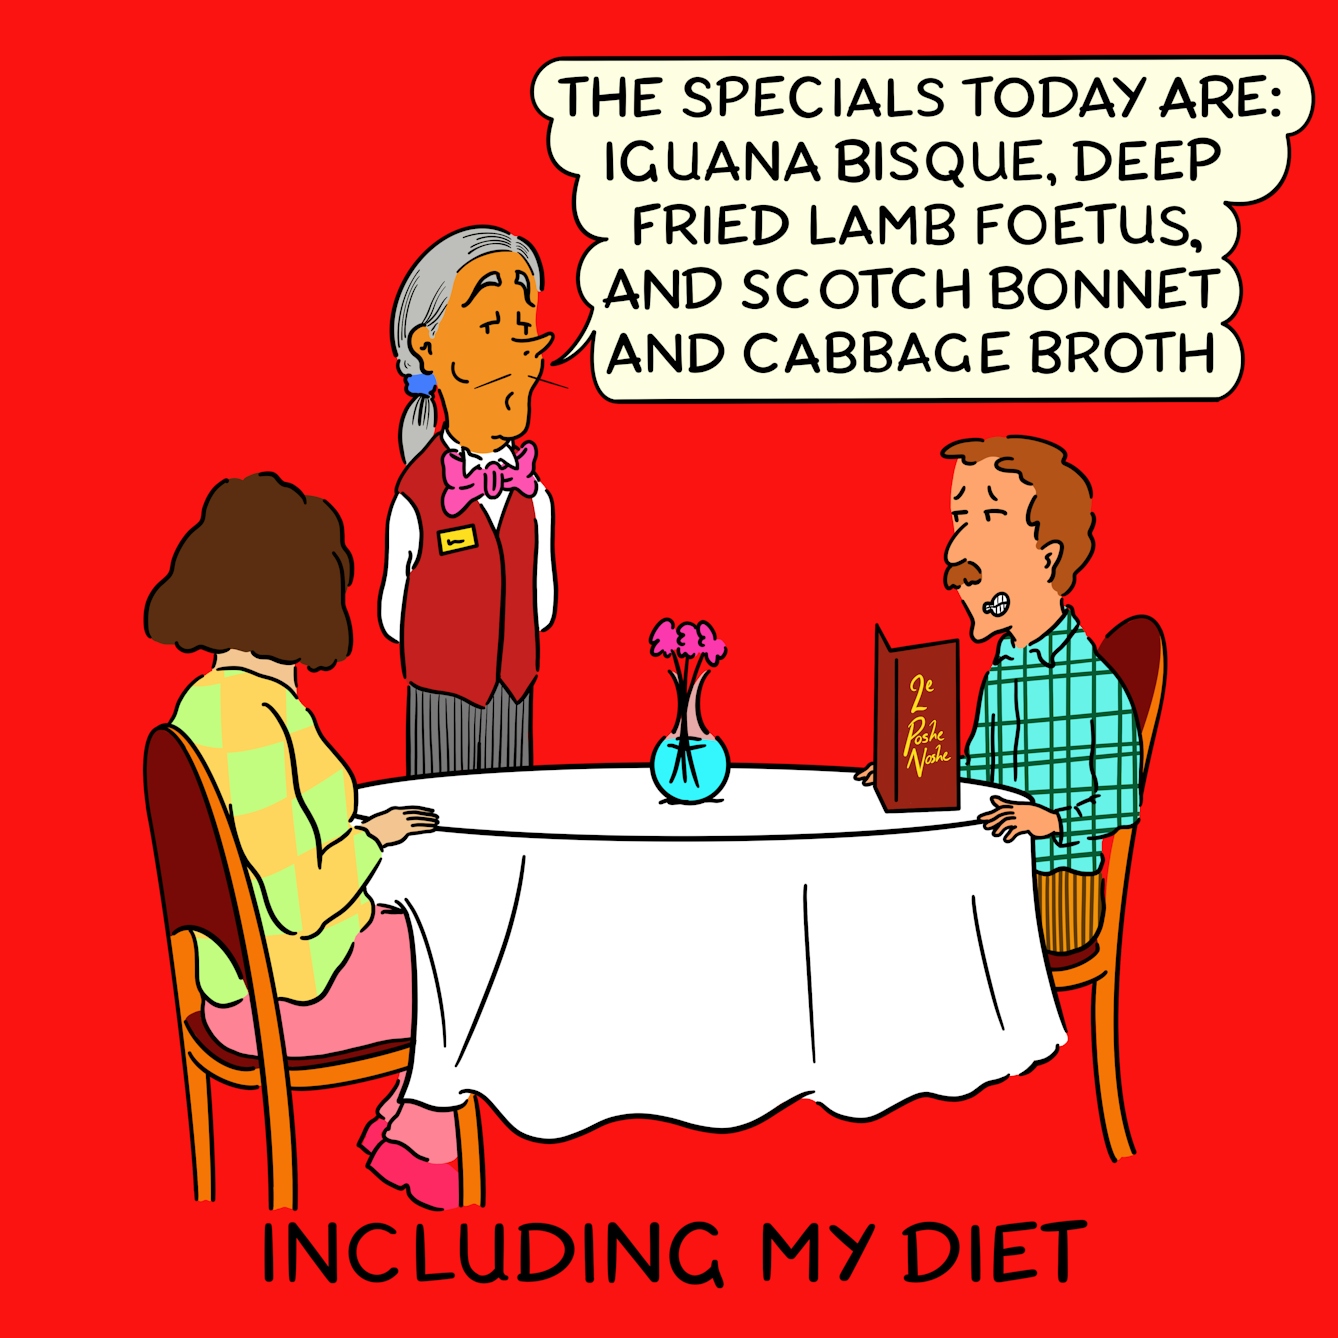 Panel 2 of a four-panel comic drawn digitally: a man with a plaid shirt and corduroy trousers sits at a restaurant table, menu before him, grimacing. The waiter with pencil moustache, red waistcoat and bow tie states "The specials today are: iguana bisque, deep fried lamb foetus, and scotch bonnet and cabbage broth"
The caption text reads "including my diet"